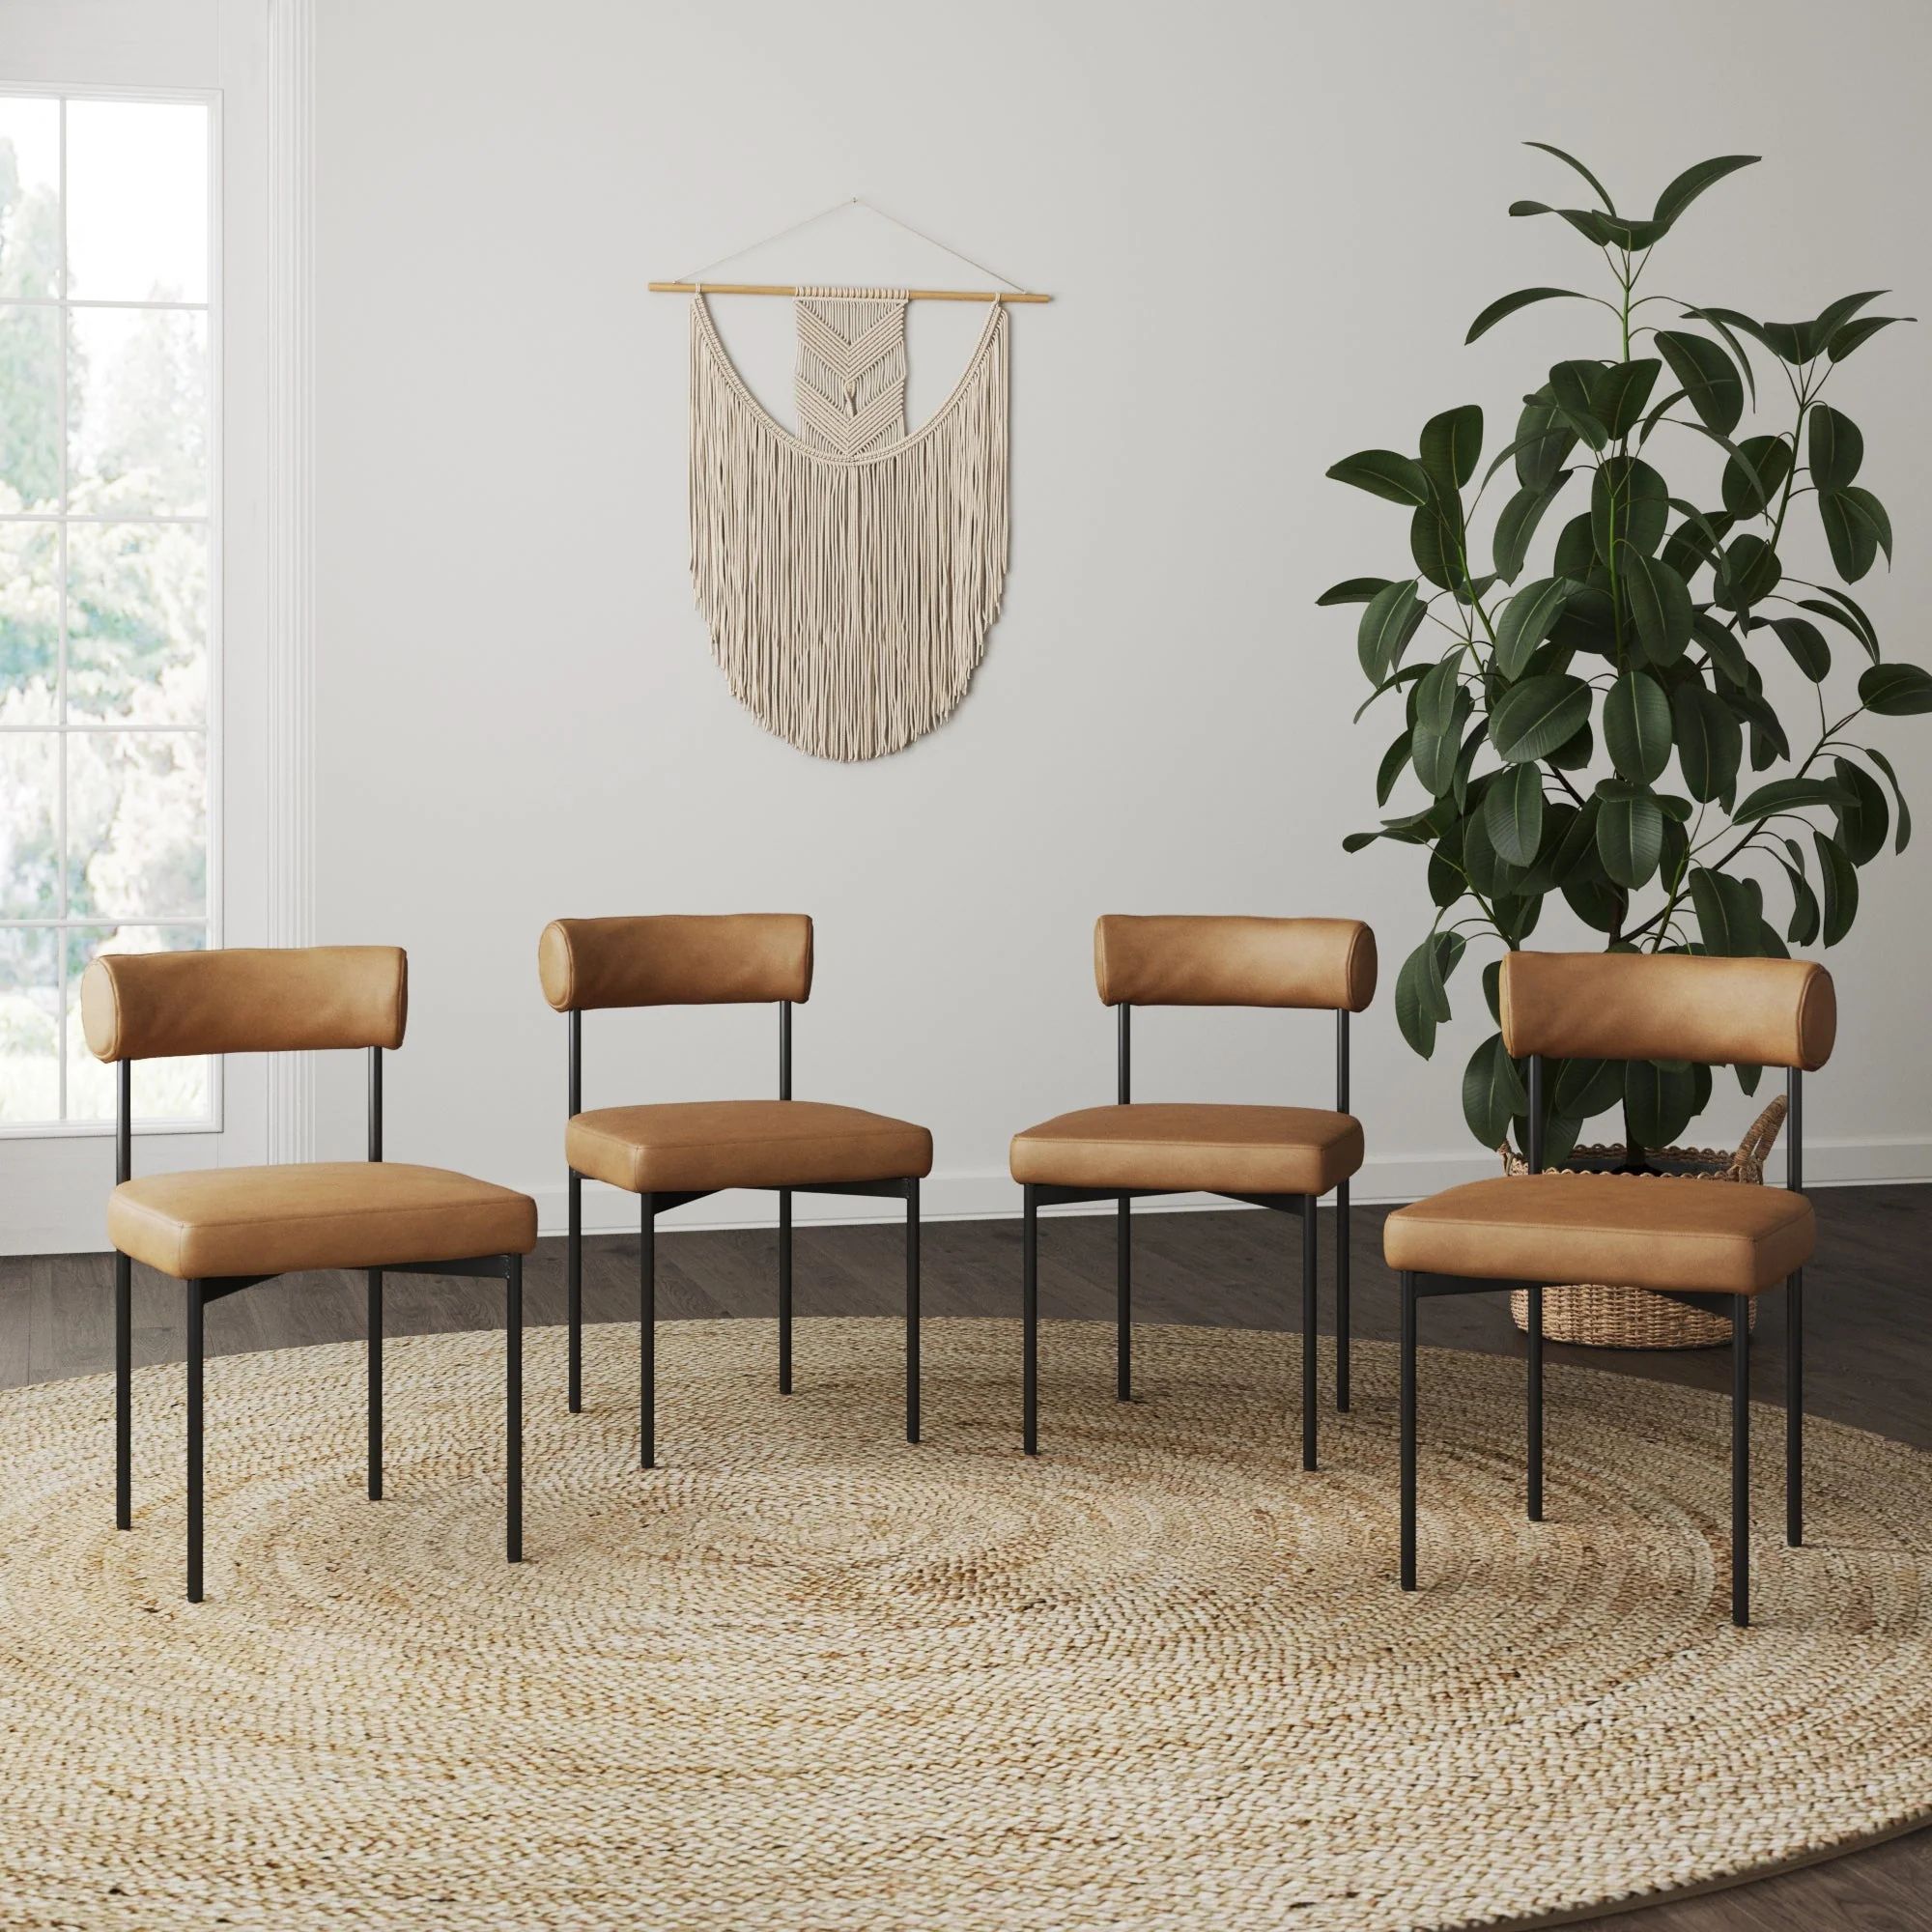 Set of 4 Faux Leather Modern Dining Chairs | Nathan James